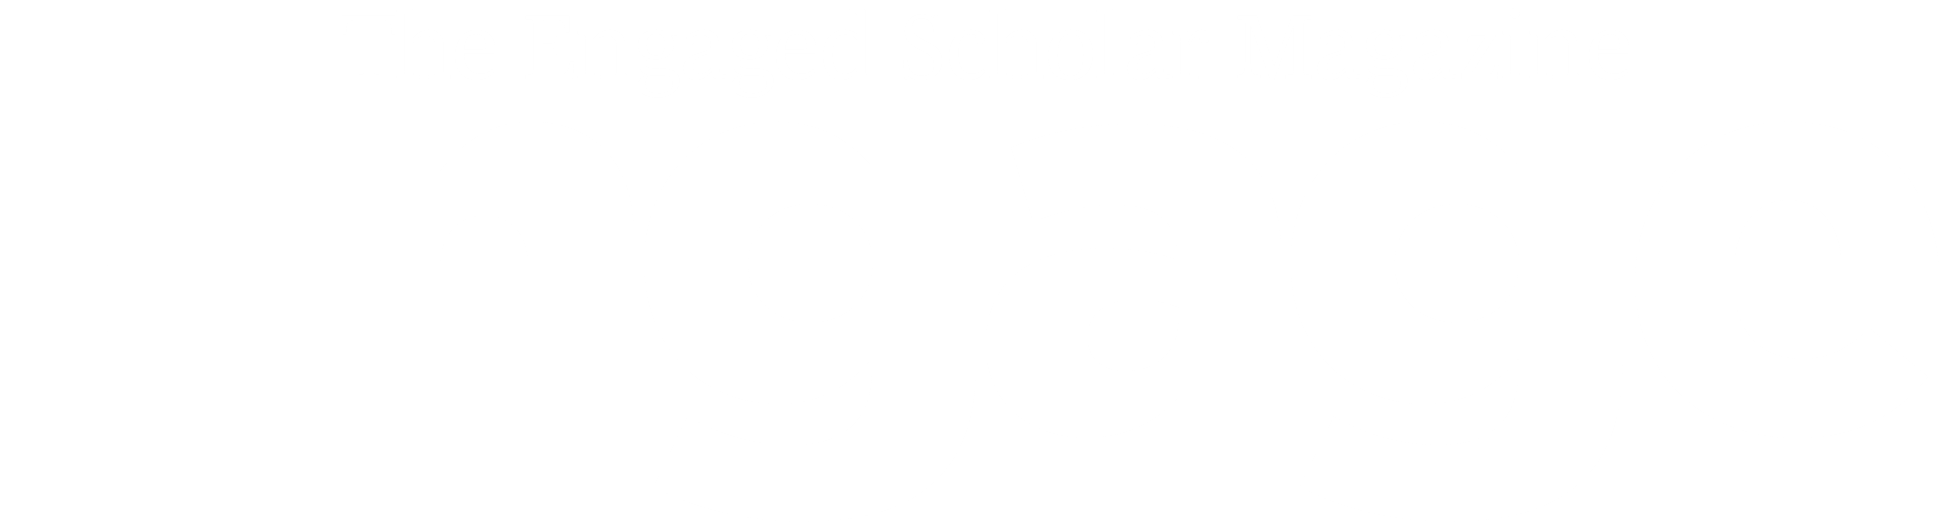 The Engaged Scholar Home Page